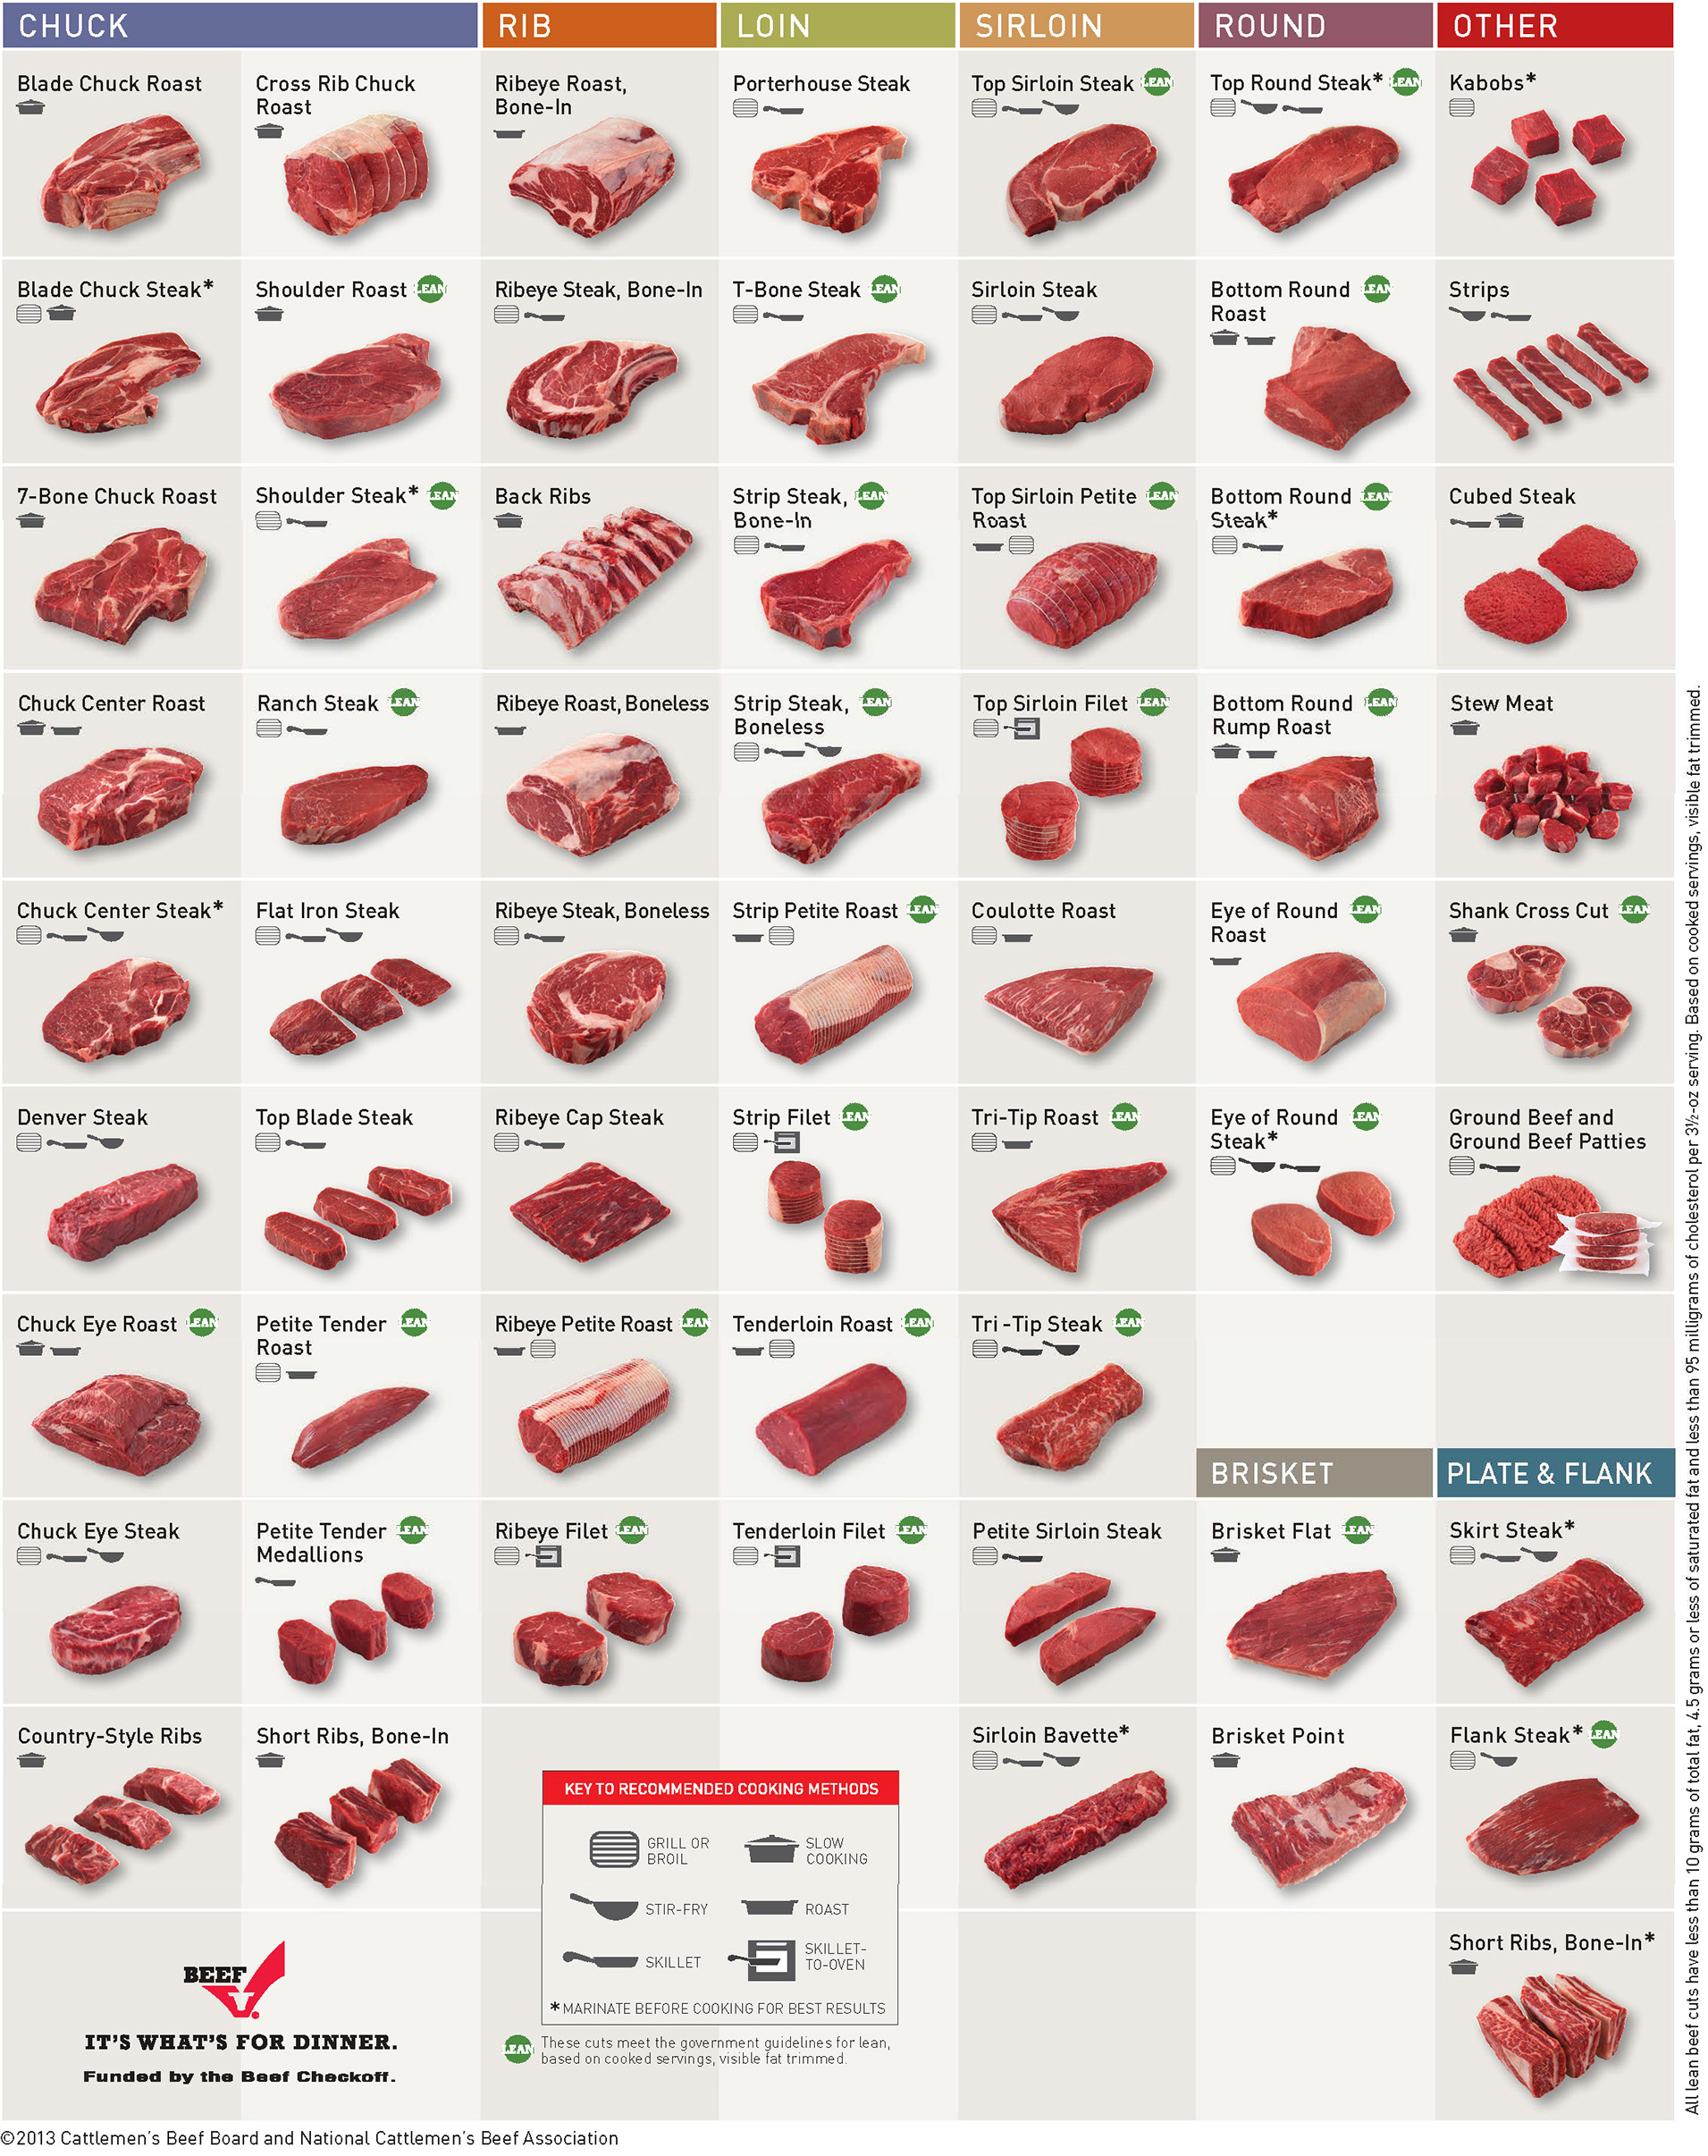 images of different types of beef cuts